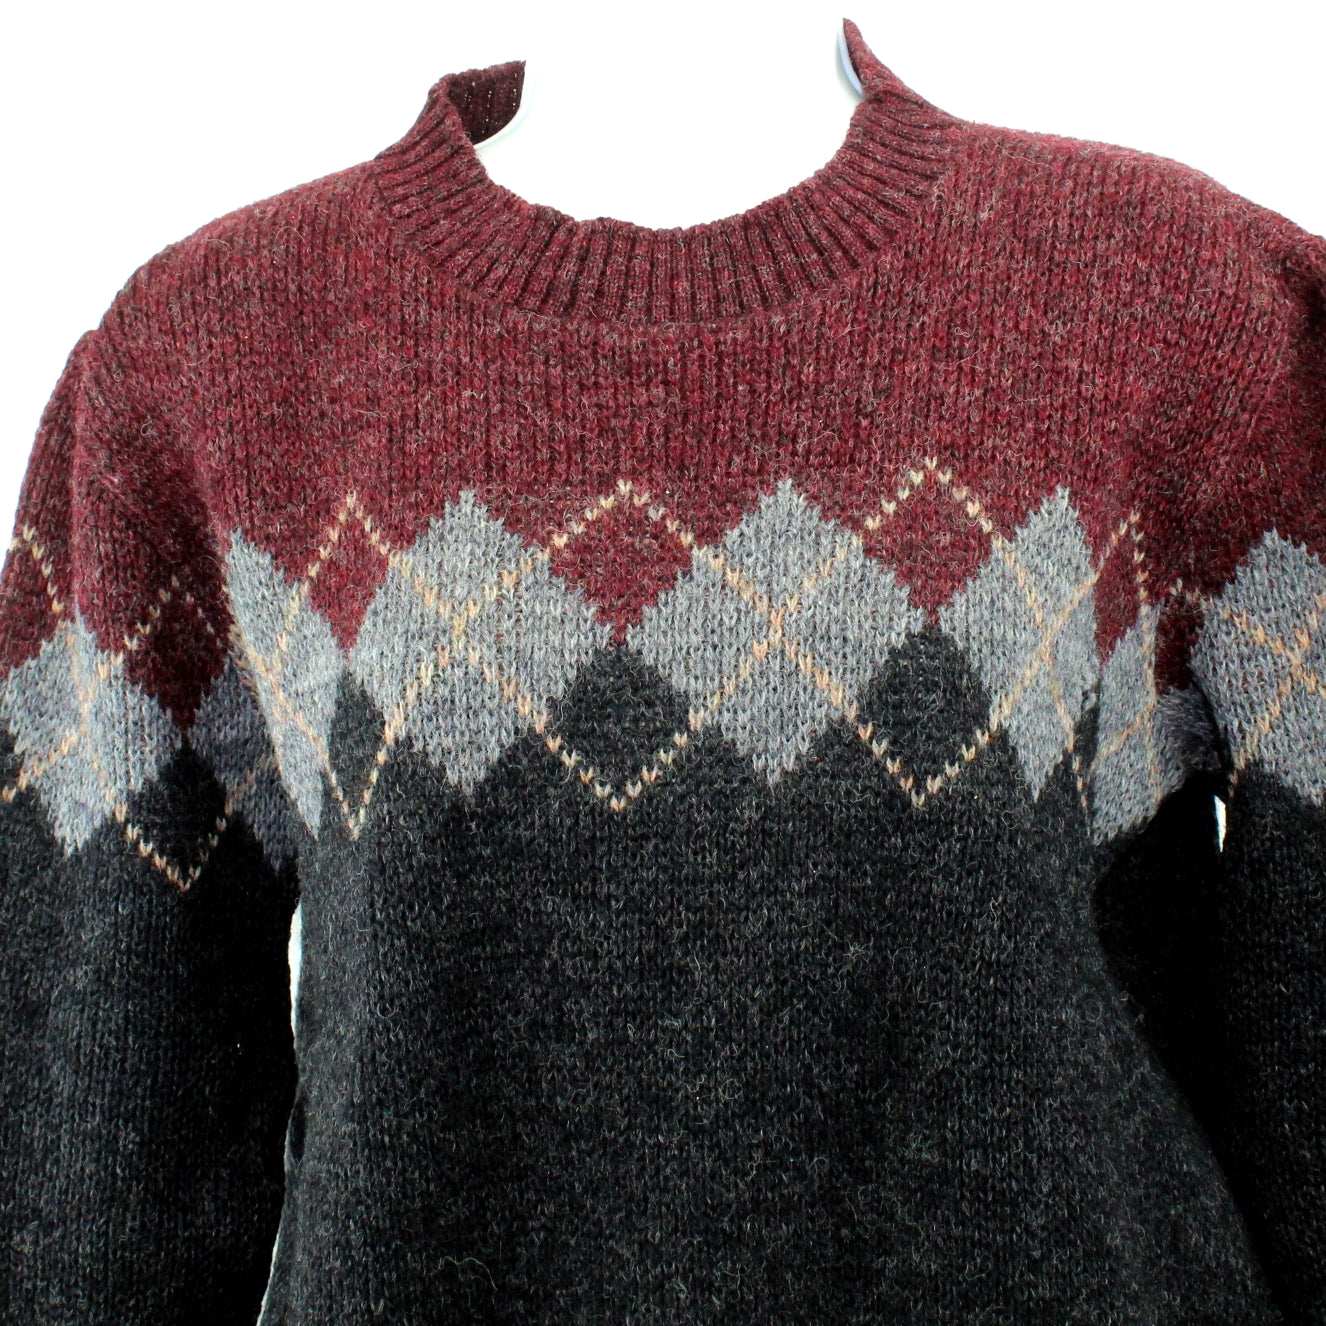 Pendleton Pullover Sweater Jumper Wool Maroon Grey Argyle Pattern - Size 36 cranberry color with black